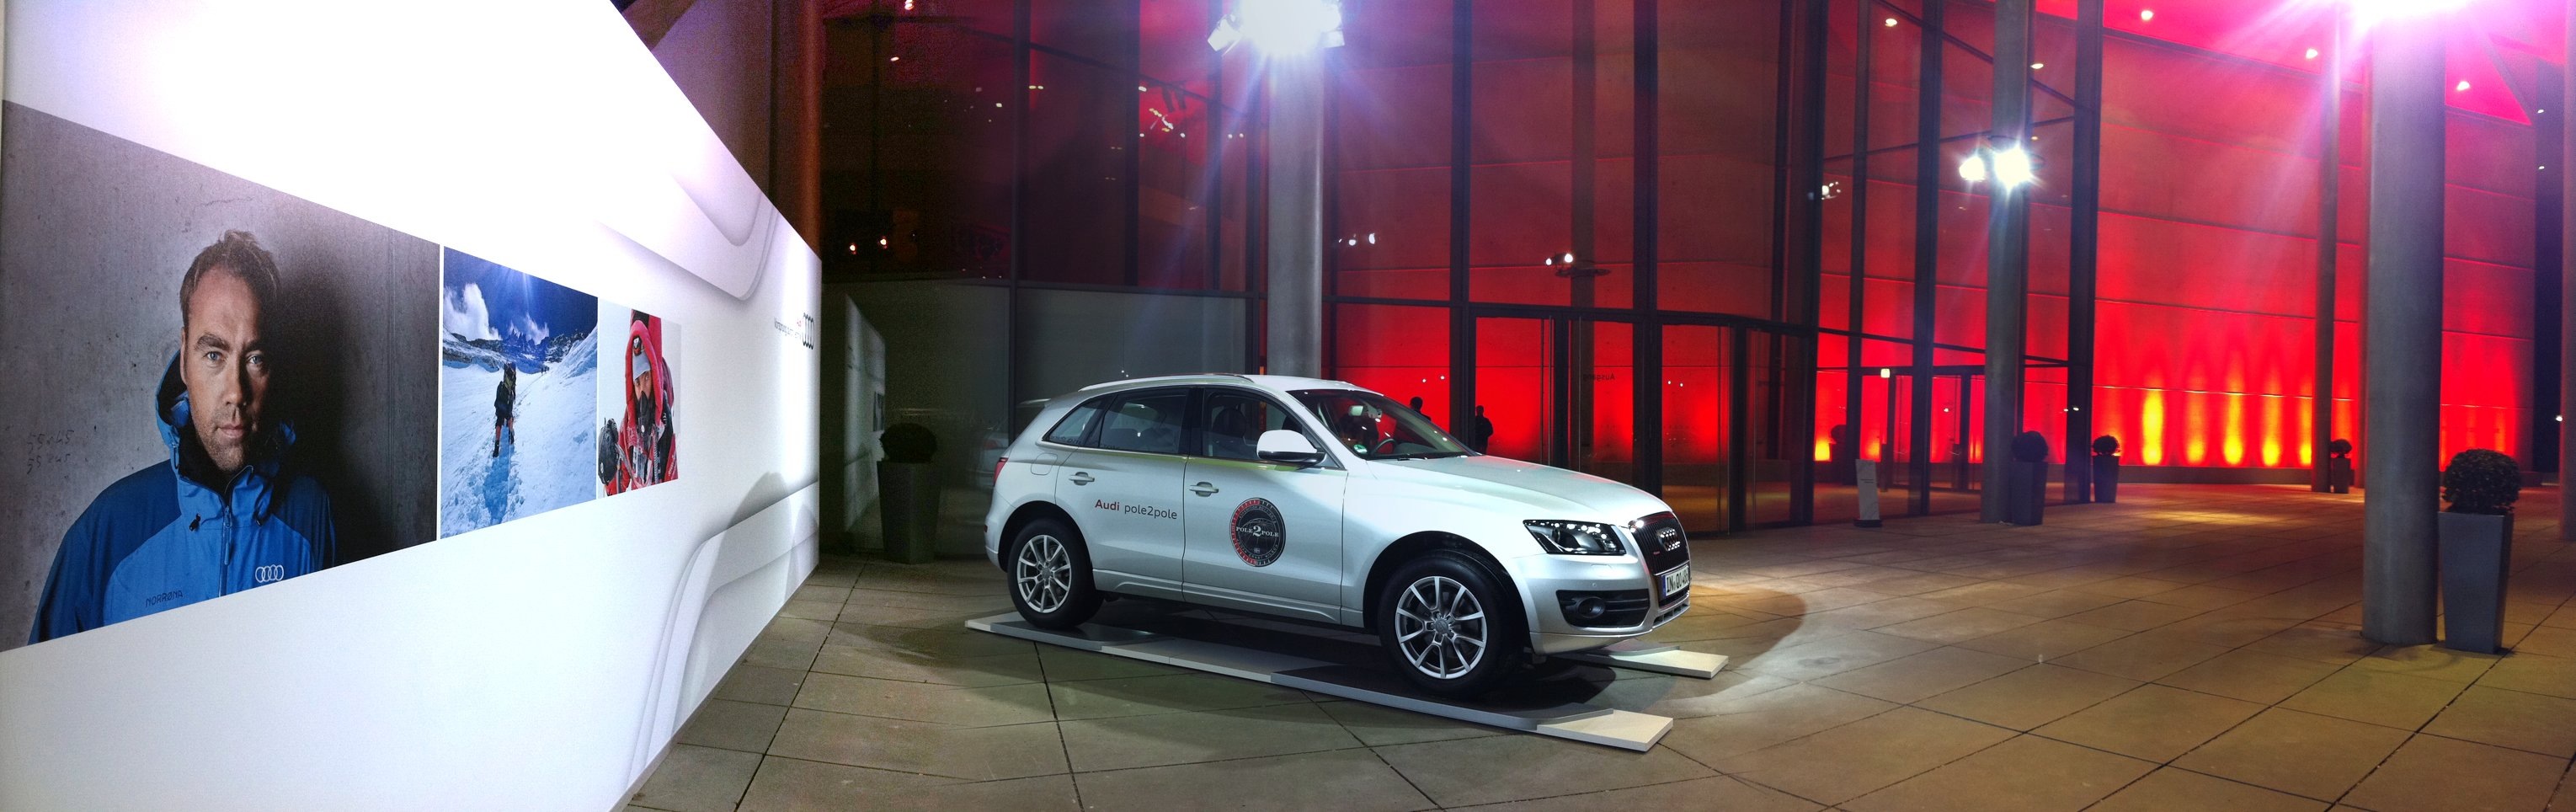 Johan Ernst display at the AUDI annual conference 